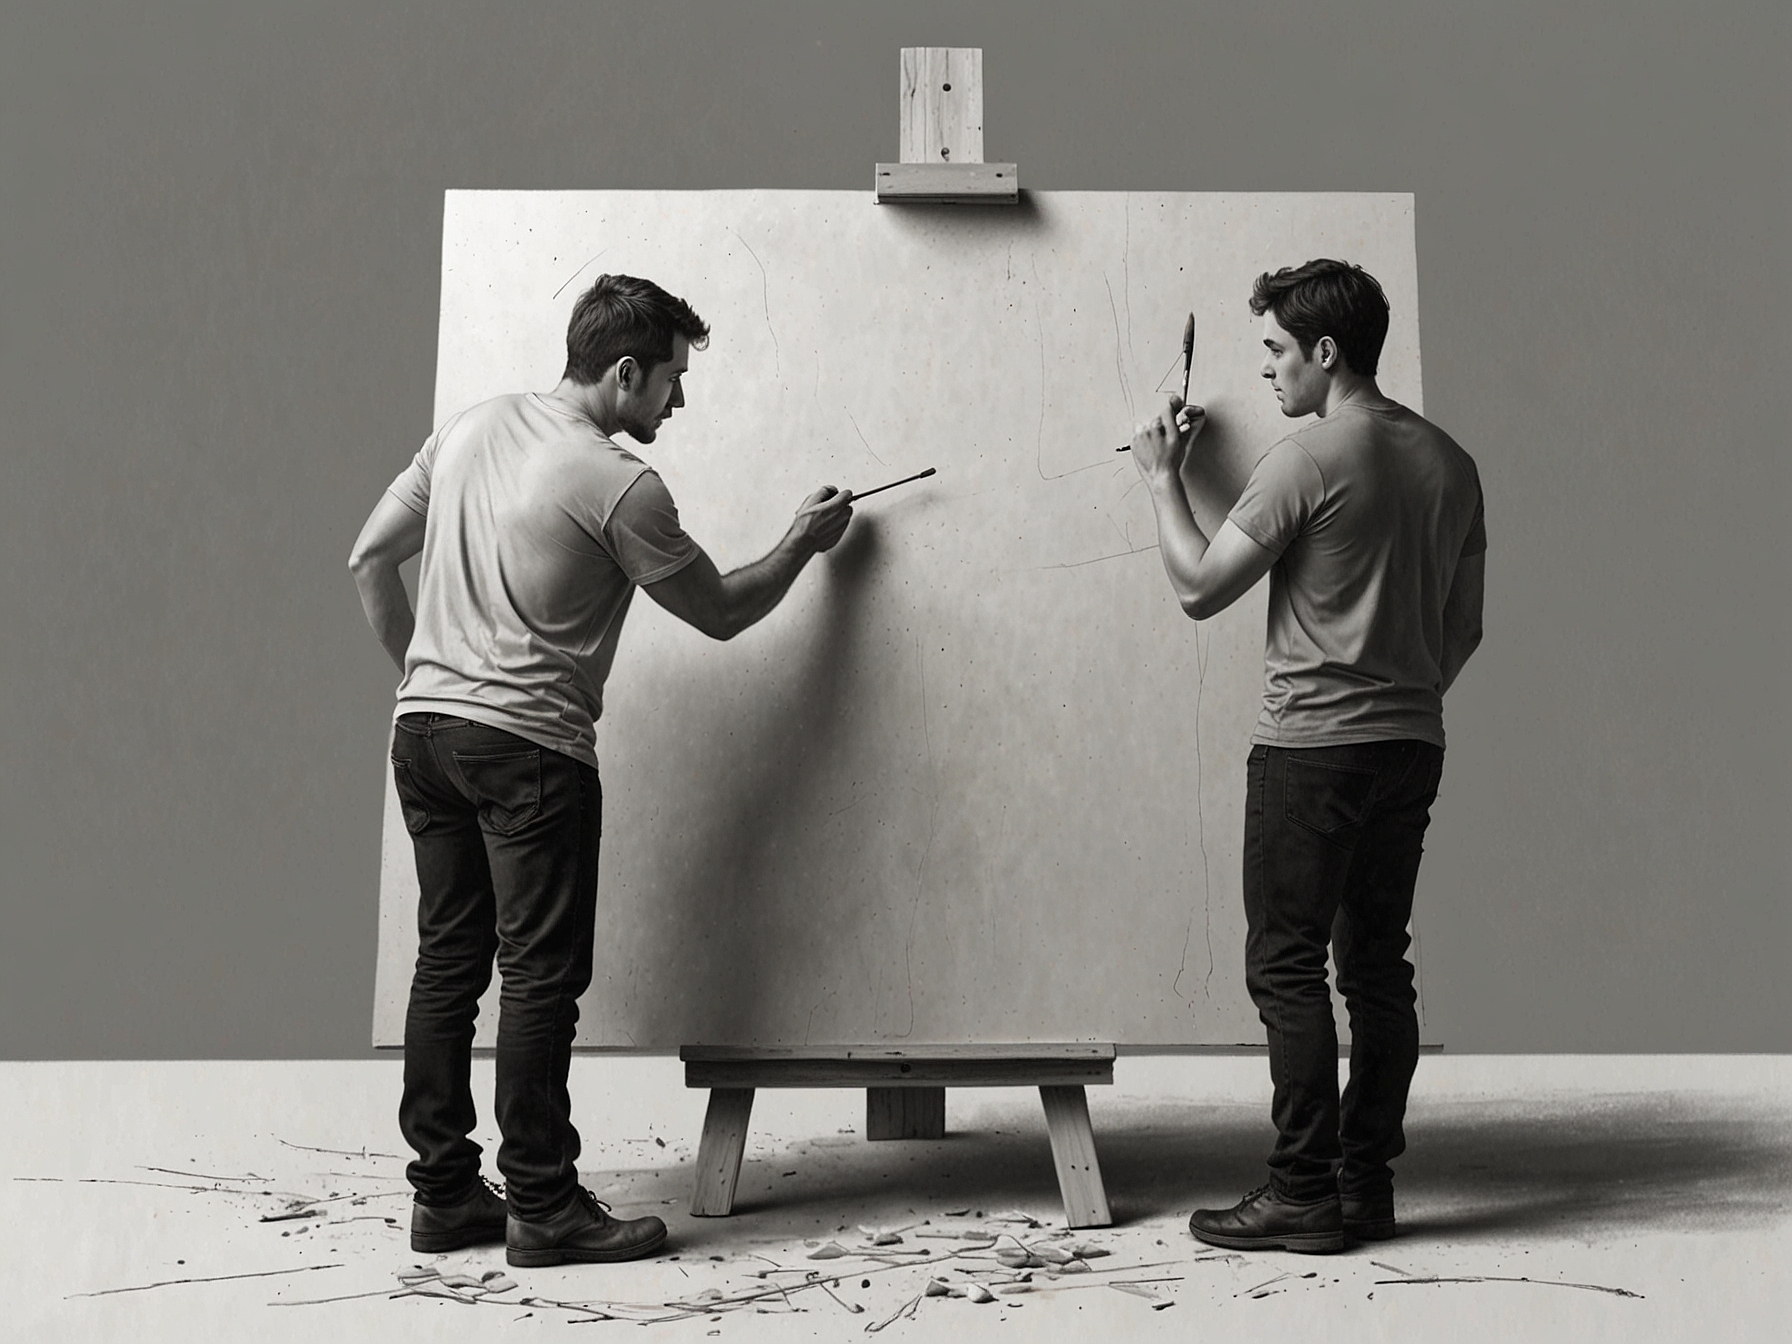 A pair painting a blank canvas together, symbolizing the practice of starting a relationship with no preconceived notions or expectations, known as blank canvassing.